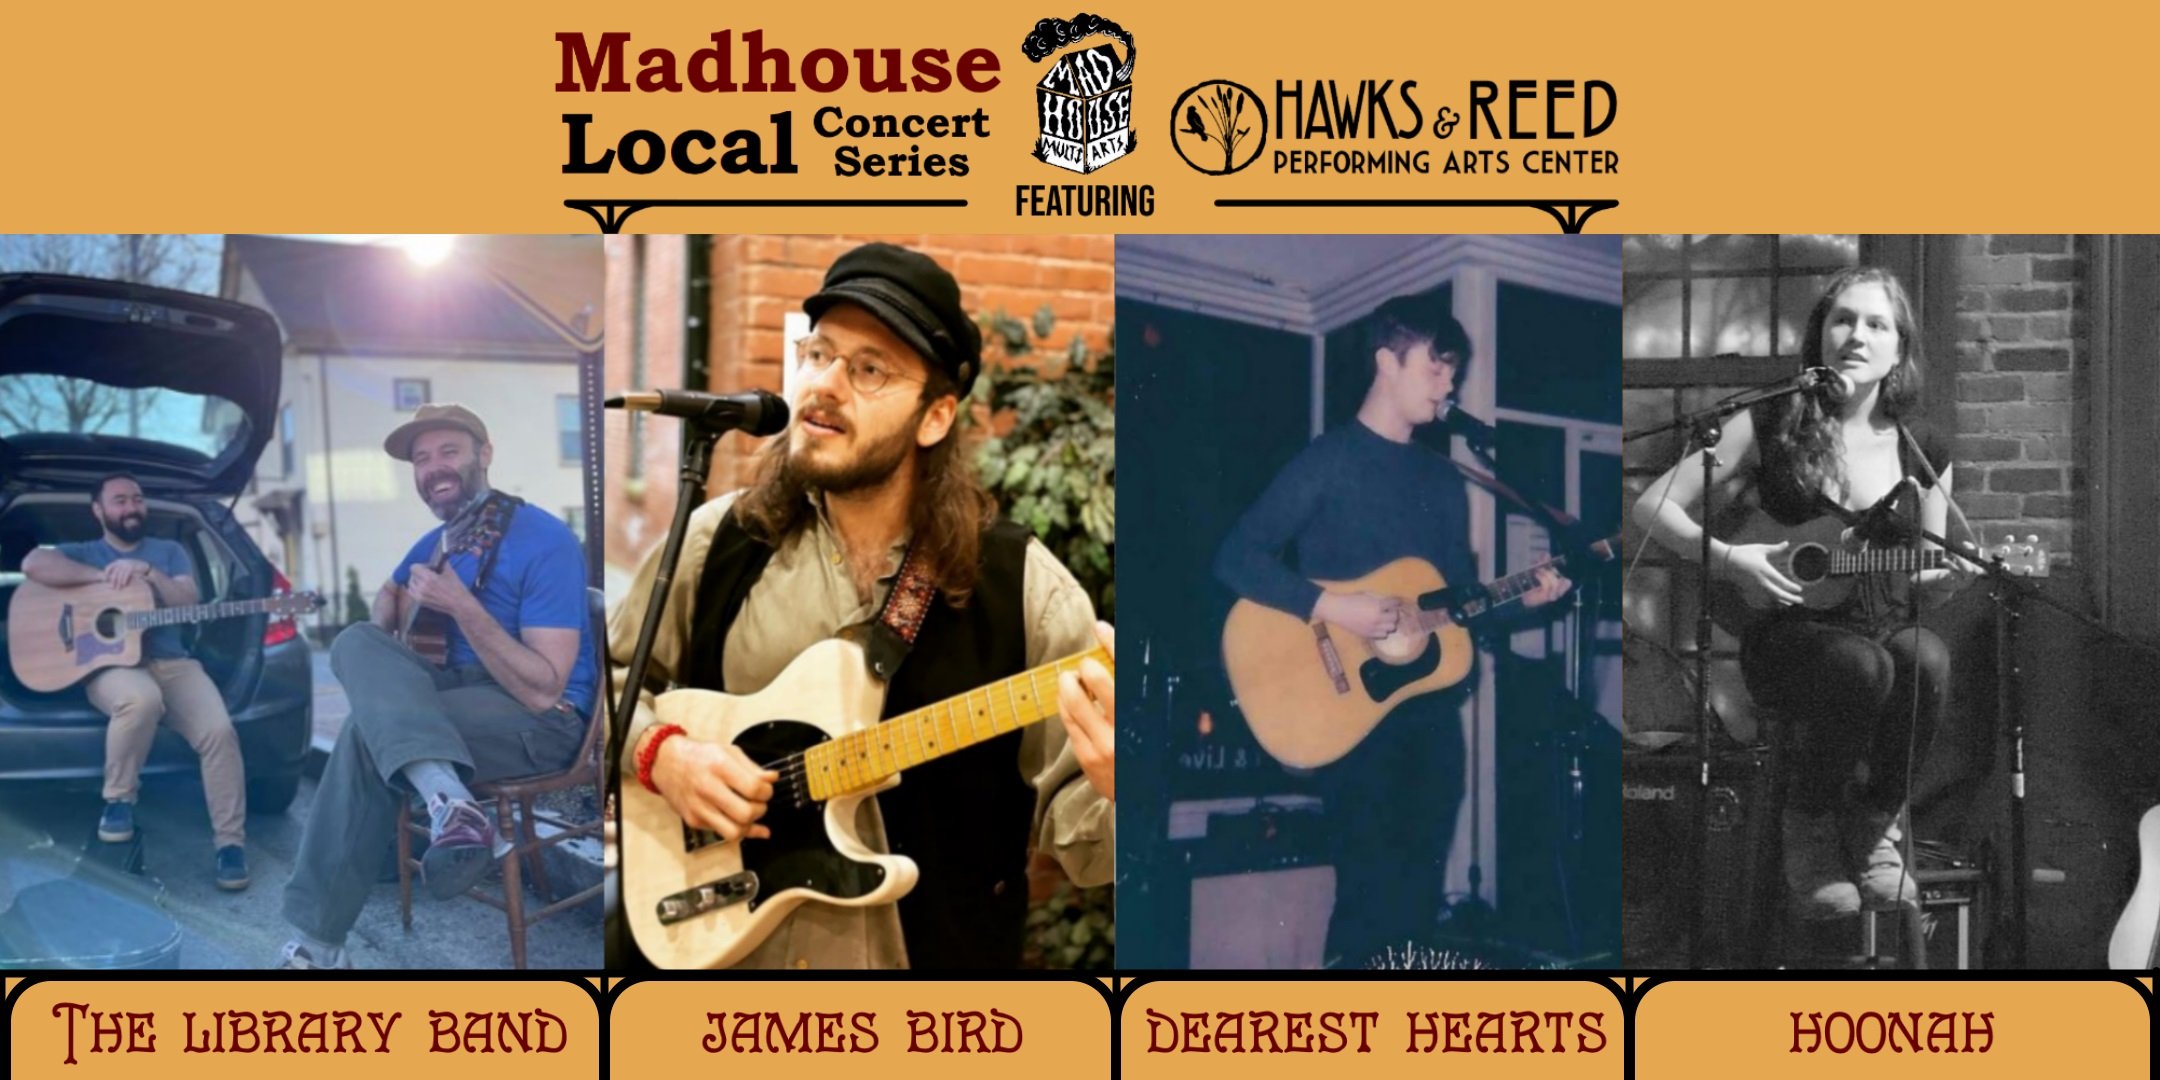 Madhouse Local Concert Series: Dearest Hearts/Hoonah/The Library Band/James Bird